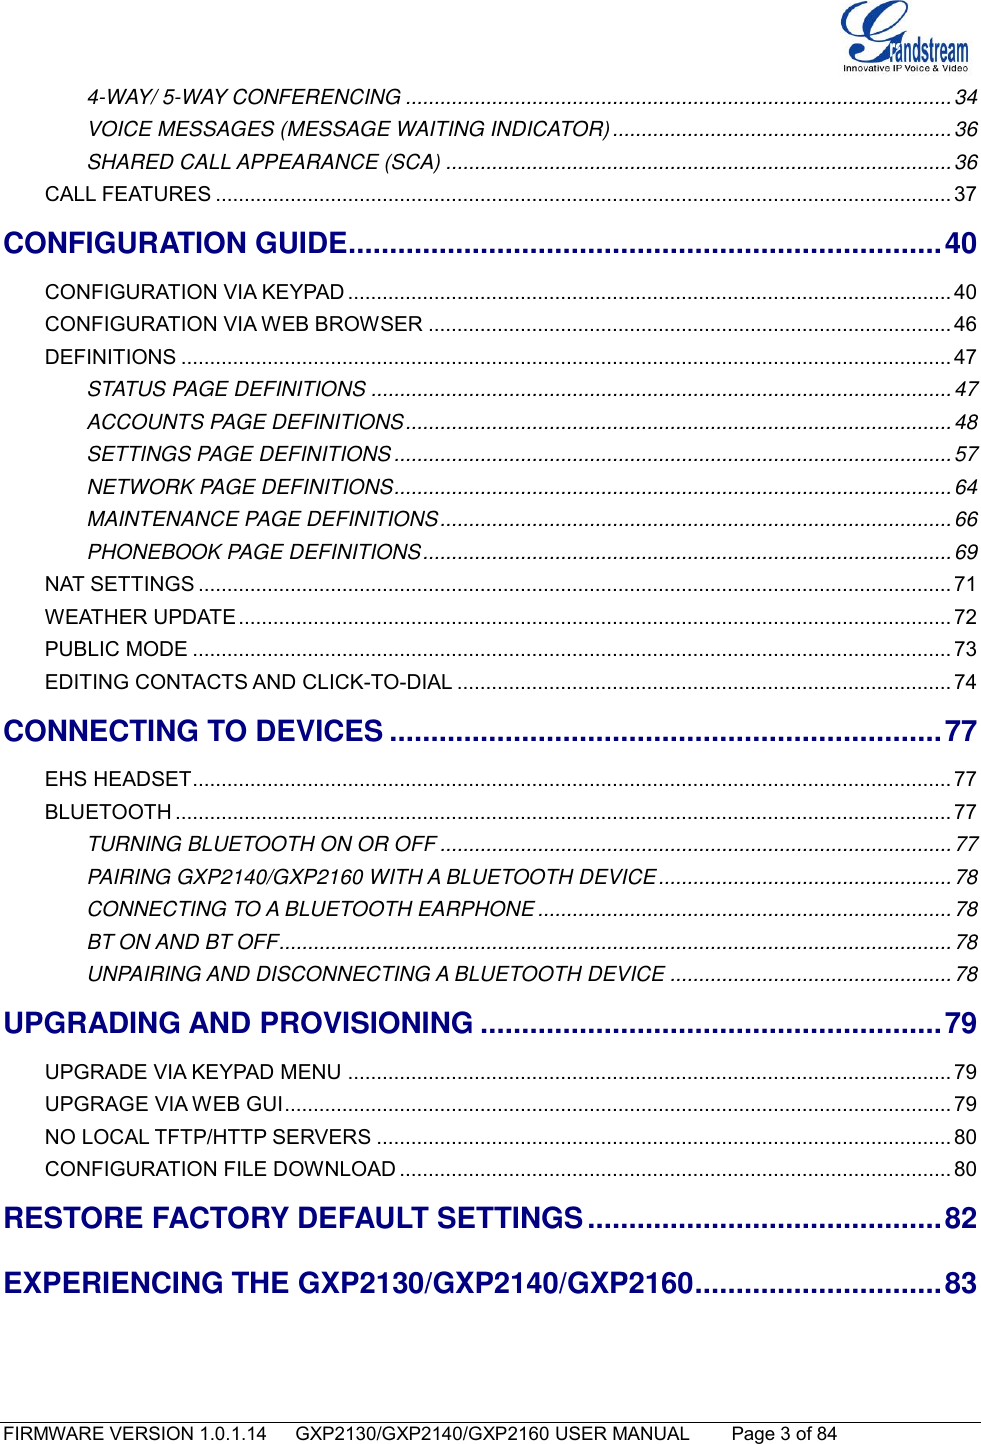   FIRMWARE VERSION 1.0.1.14      GXP2130/GXP2140/GXP2160 USER MANUAL     Page 3 of 84                                   4-WAY/ 5-WAY CONFERENCING ............................................................................................... 34 VOICE MESSAGES (MESSAGE WAITING INDICATOR) ........................................................... 36 SHARED CALL APPEARANCE (SCA) ........................................................................................ 36 CALL FEATURES ................................................................................................................................ 37 CONFIGURATION GUIDE ........................................................................ 40 CONFIGURATION VIA KEYPAD ......................................................................................................... 40 CONFIGURATION VIA WEB BROWSER ........................................................................................... 46 DEFINITIONS ...................................................................................................................................... 47 STATUS PAGE DEFINITIONS ..................................................................................................... 47 ACCOUNTS PAGE DEFINITIONS ............................................................................................... 48 SETTINGS PAGE DEFINITIONS ................................................................................................. 57 NETWORK PAGE DEFINITIONS ................................................................................................. 64 MAINTENANCE PAGE DEFINITIONS ......................................................................................... 66 PHONEBOOK PAGE DEFINITIONS ............................................................................................ 69 NAT SETTINGS ................................................................................................................................... 71 WEATHER UPDATE ............................................................................................................................ 72 PUBLIC MODE .................................................................................................................................... 73 EDITING CONTACTS AND CLICK-TO-DIAL ...................................................................................... 74 CONNECTING TO DEVICES ................................................................... 77 EHS HEADSET .................................................................................................................................... 77 BLUETOOTH ....................................................................................................................................... 77 TURNING BLUETOOTH ON OR OFF ......................................................................................... 77 PAIRING GXP2140/GXP2160 WITH A BLUETOOTH DEVICE ................................................... 78 CONNECTING TO A BLUETOOTH EARPHONE ........................................................................ 78 BT ON AND BT OFF ..................................................................................................................... 78 UNPAIRING AND DISCONNECTING A BLUETOOTH DEVICE ................................................. 78 UPGRADING AND PROVISIONING ........................................................ 79 UPGRADE VIA KEYPAD MENU ......................................................................................................... 79 UPGRAGE VIA WEB GUI .................................................................................................................... 79 NO LOCAL TFTP/HTTP SERVERS .................................................................................................... 80 CONFIGURATION FILE DOWNLOAD ................................................................................................ 80 RESTORE FACTORY DEFAULT SETTINGS ........................................... 82 EXPERIENCING THE GXP2130/GXP2140/GXP2160 .............................. 83   